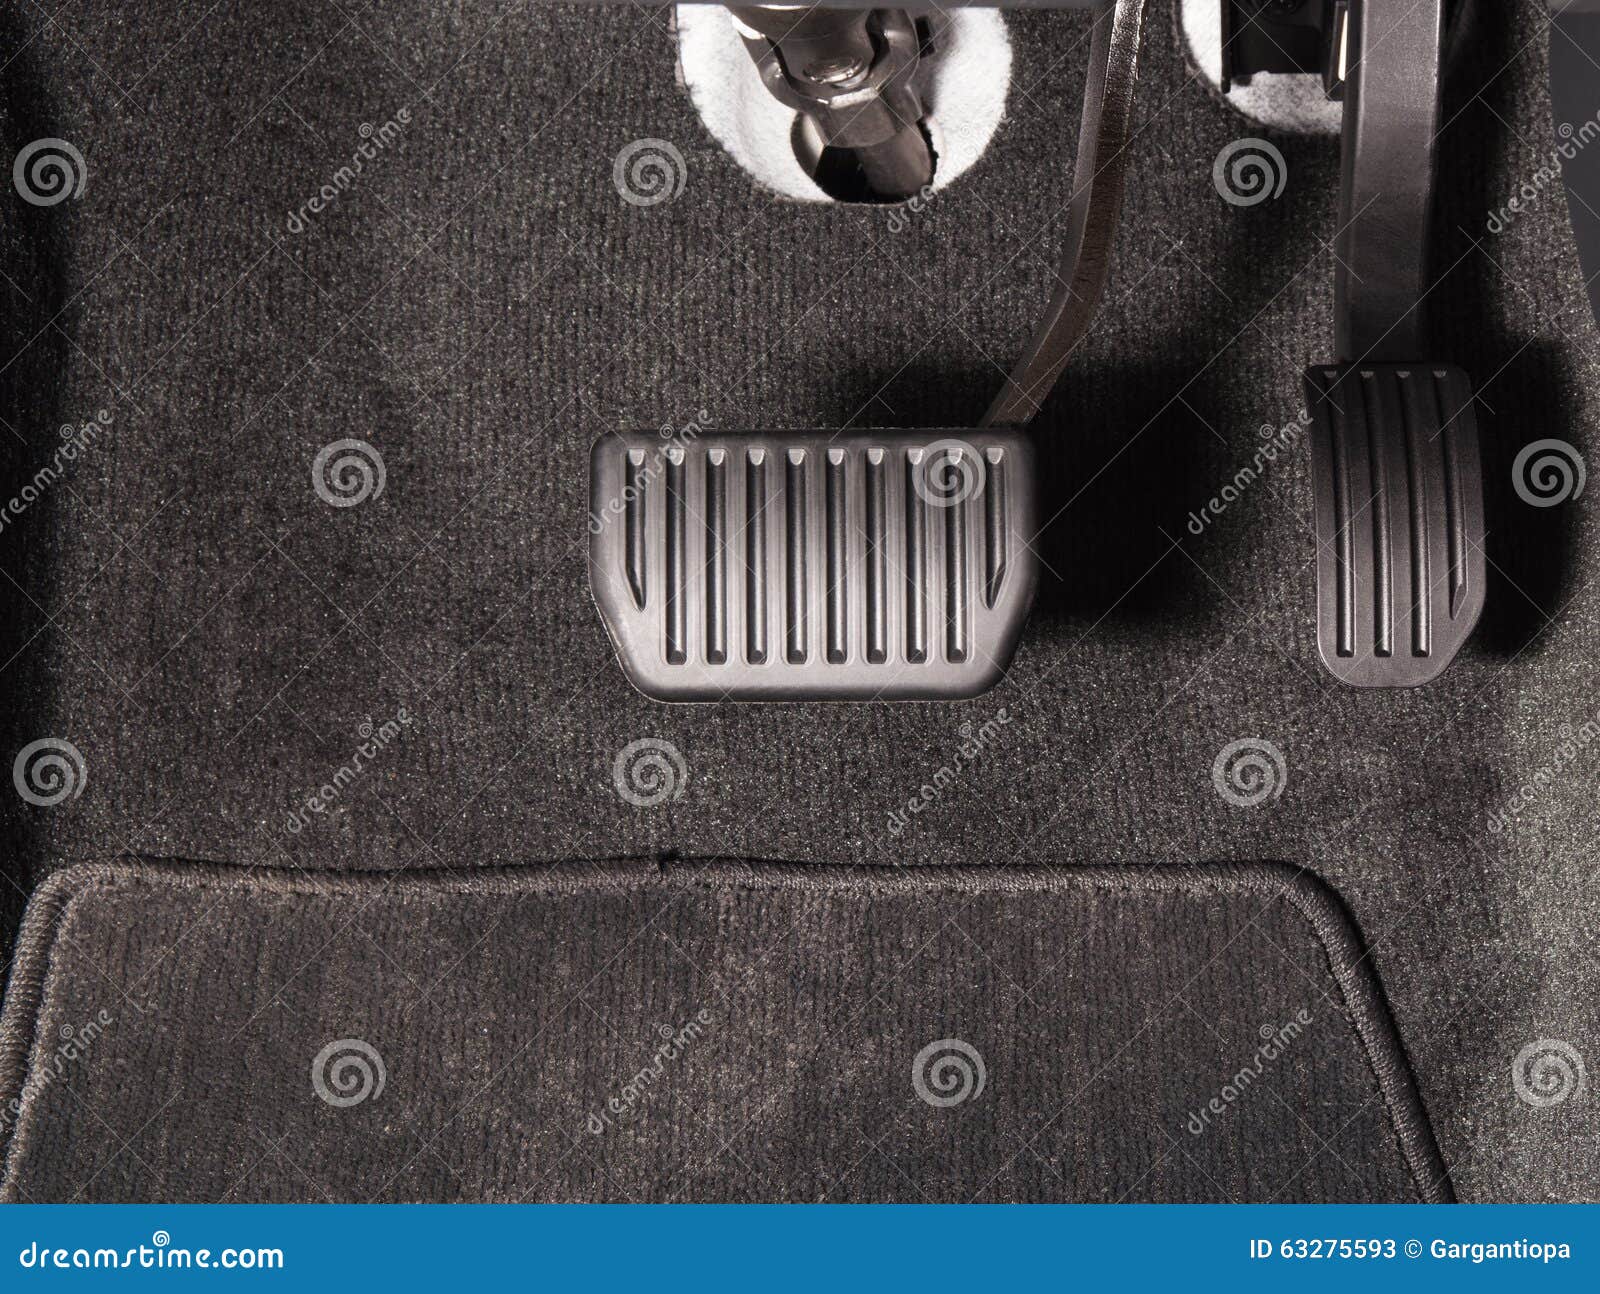 Brake And Accelerator Pedal Stock Image Image Of Driver Clutch 63275593